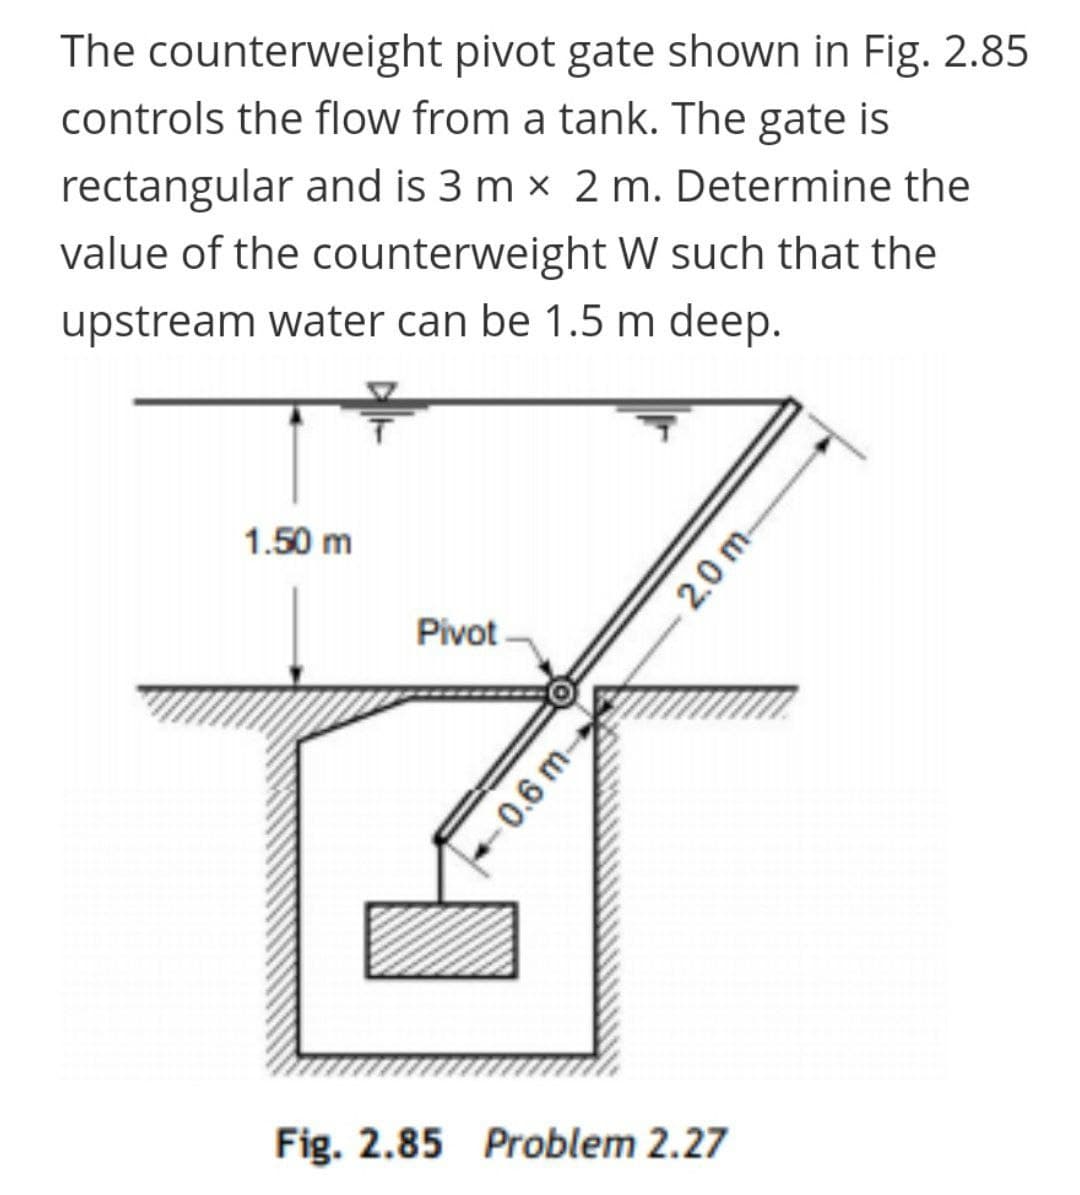 The counterweight pivot gate shown in Fig. 2.85
controls the flow from a tank. The gate is
rectangular and is 3 m x 2 m. Determine the
value of the counterweight W such that the
upstream water can be 1.5 m deep.
1.50 m
Pivot
Fig. 2.85 Problem 2.27
-0.6 m-
2.0 m-
